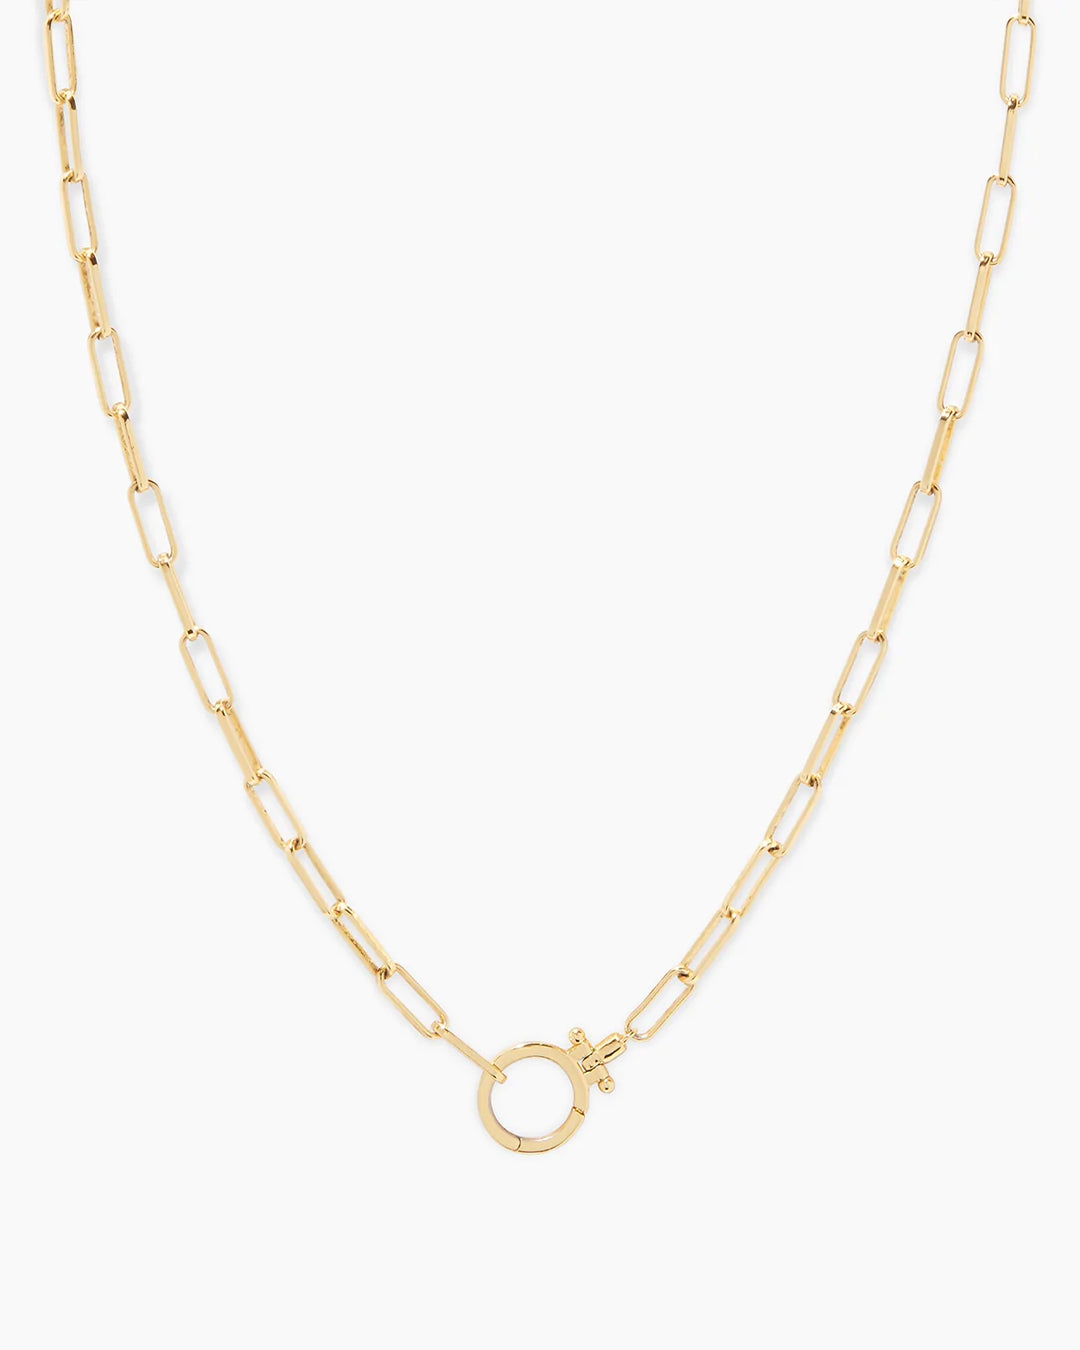 YELLOW GOLD PAPERCLIP LINK NECKLACE - Nelson's Jewelers